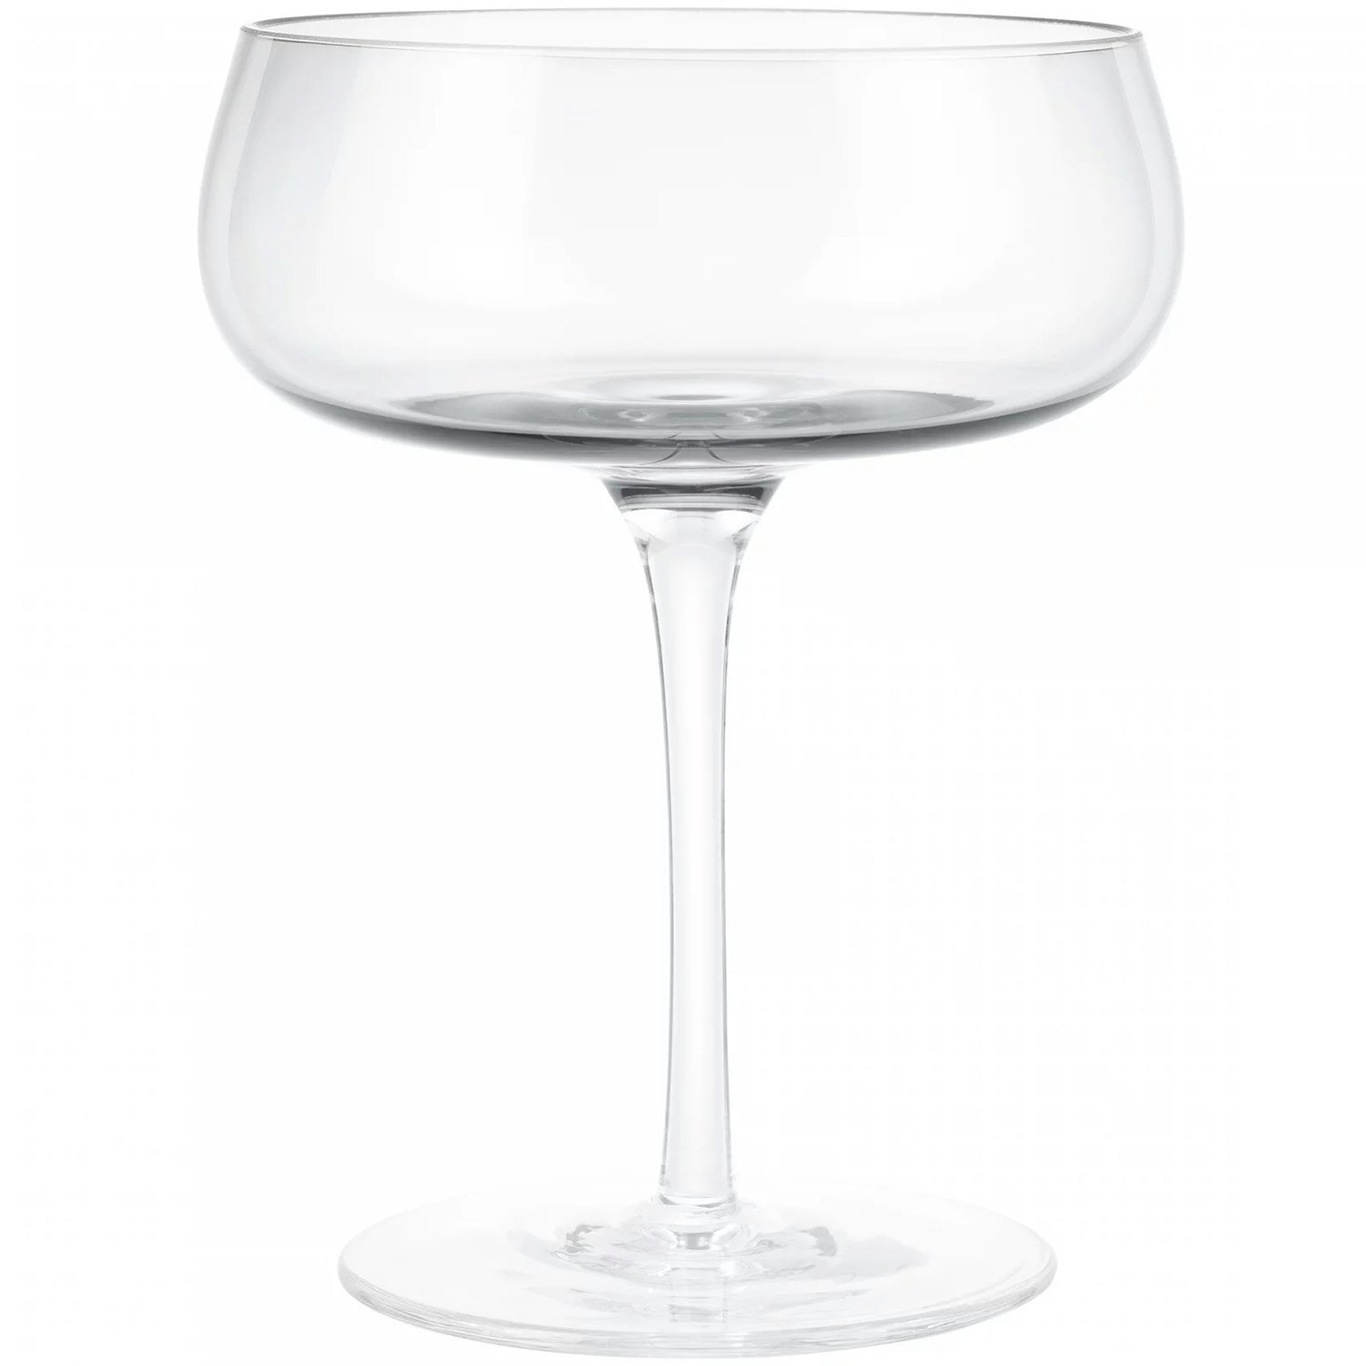 BELO Champagne Glass, 2-pack